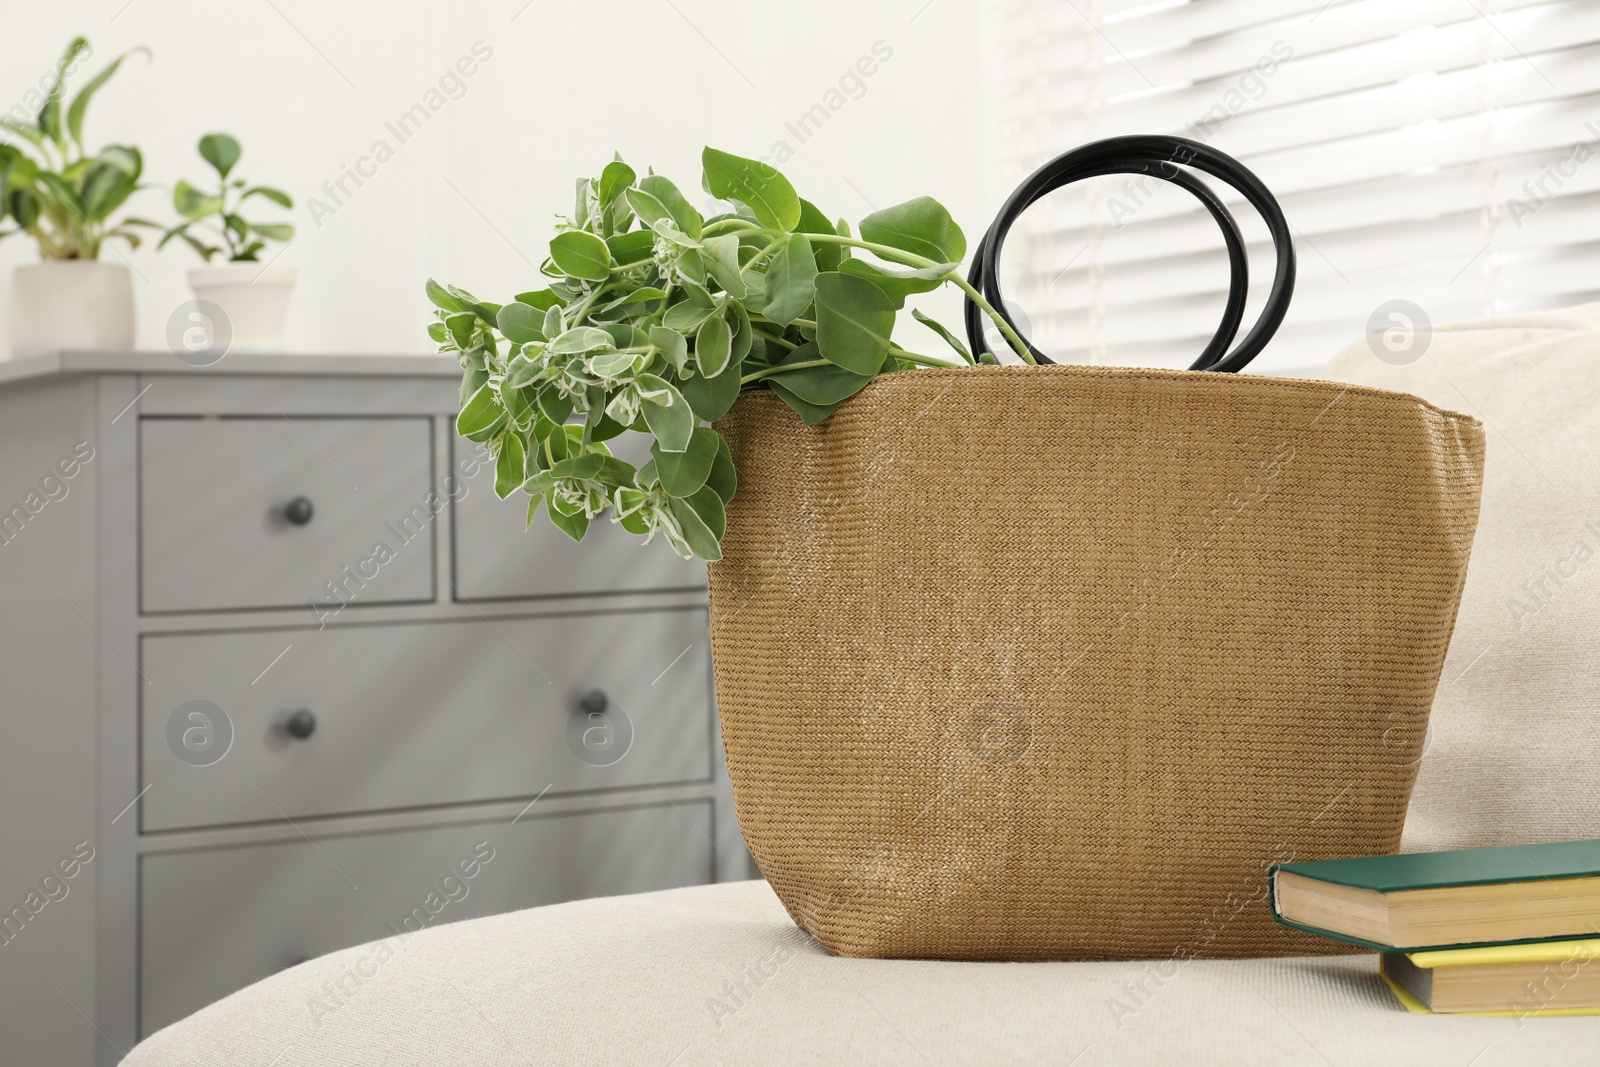 Photo of Stylish beach bag with plant and books on sofa in room